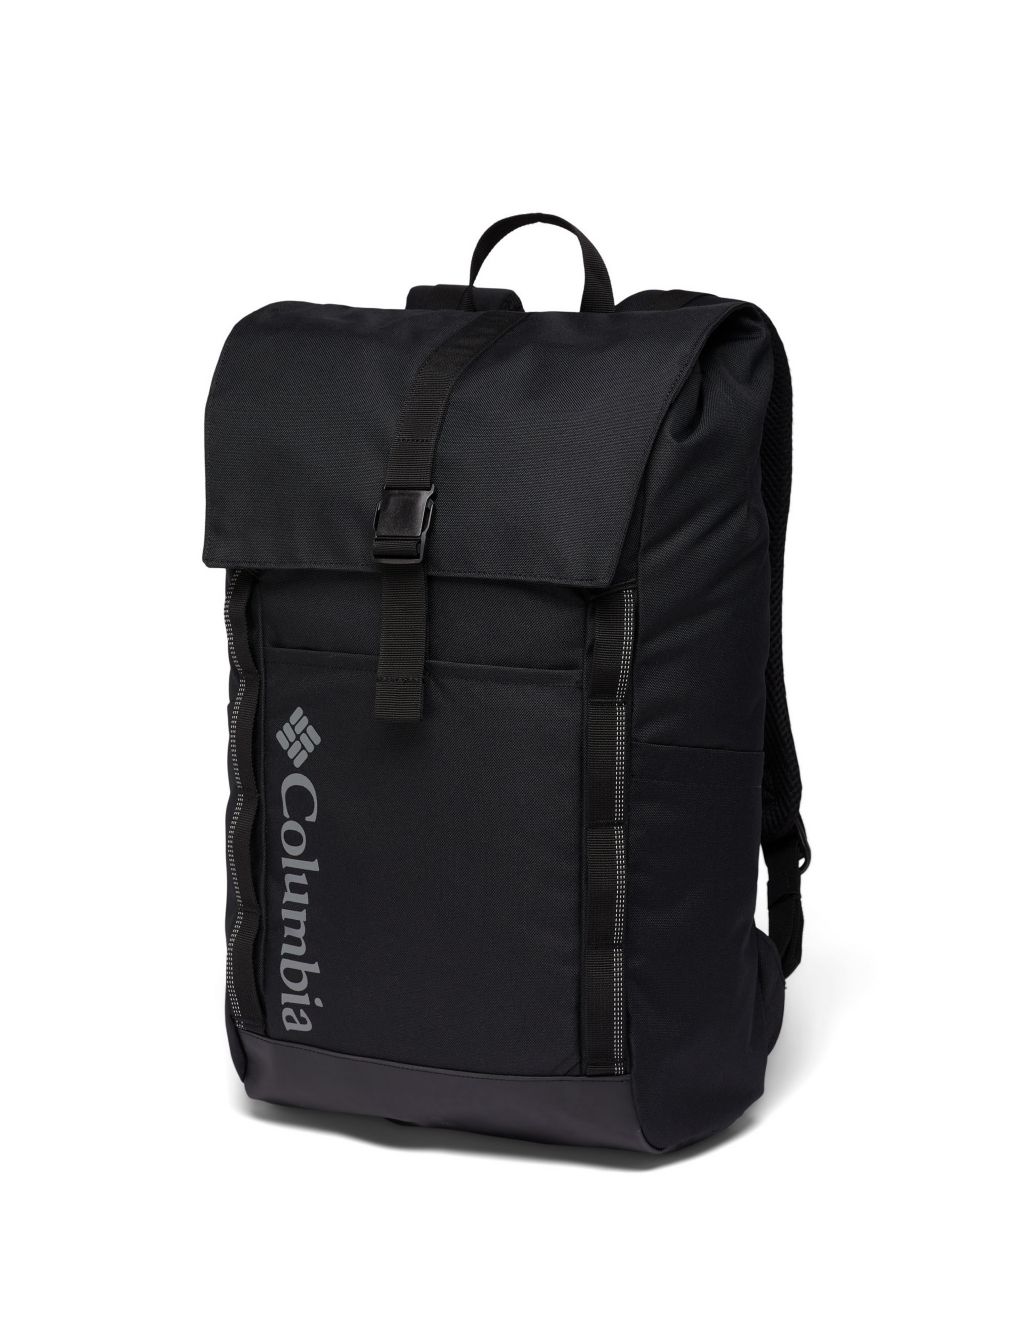 Convey 24L Backpack image 1